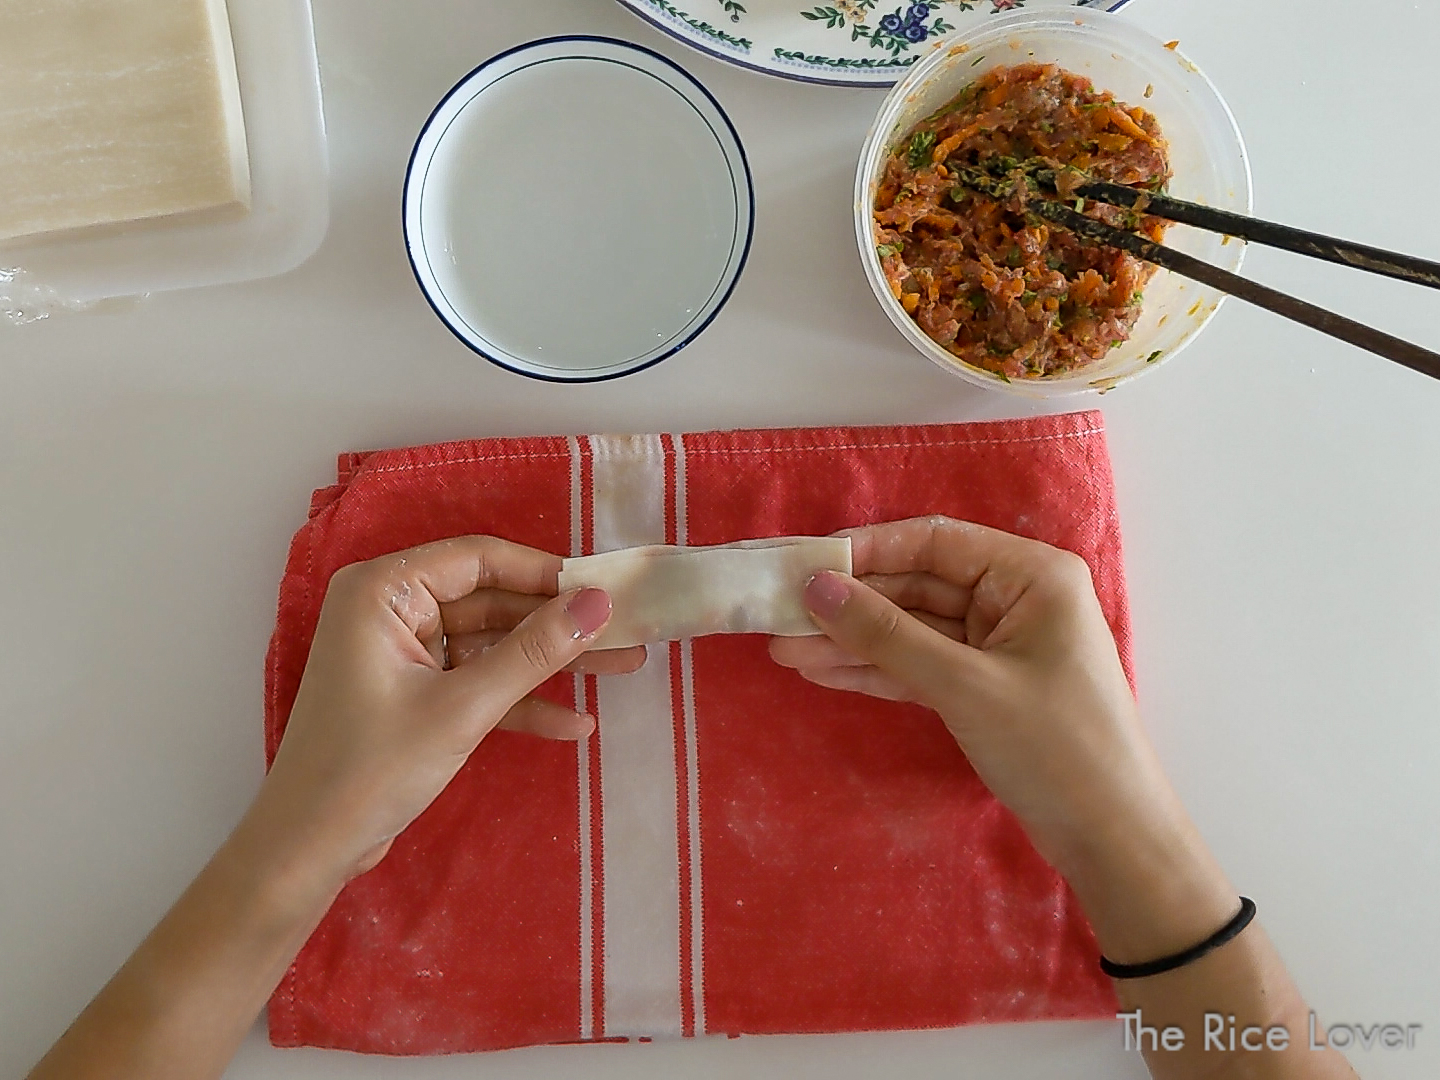 Pinch the sides to form a rectangular pillow